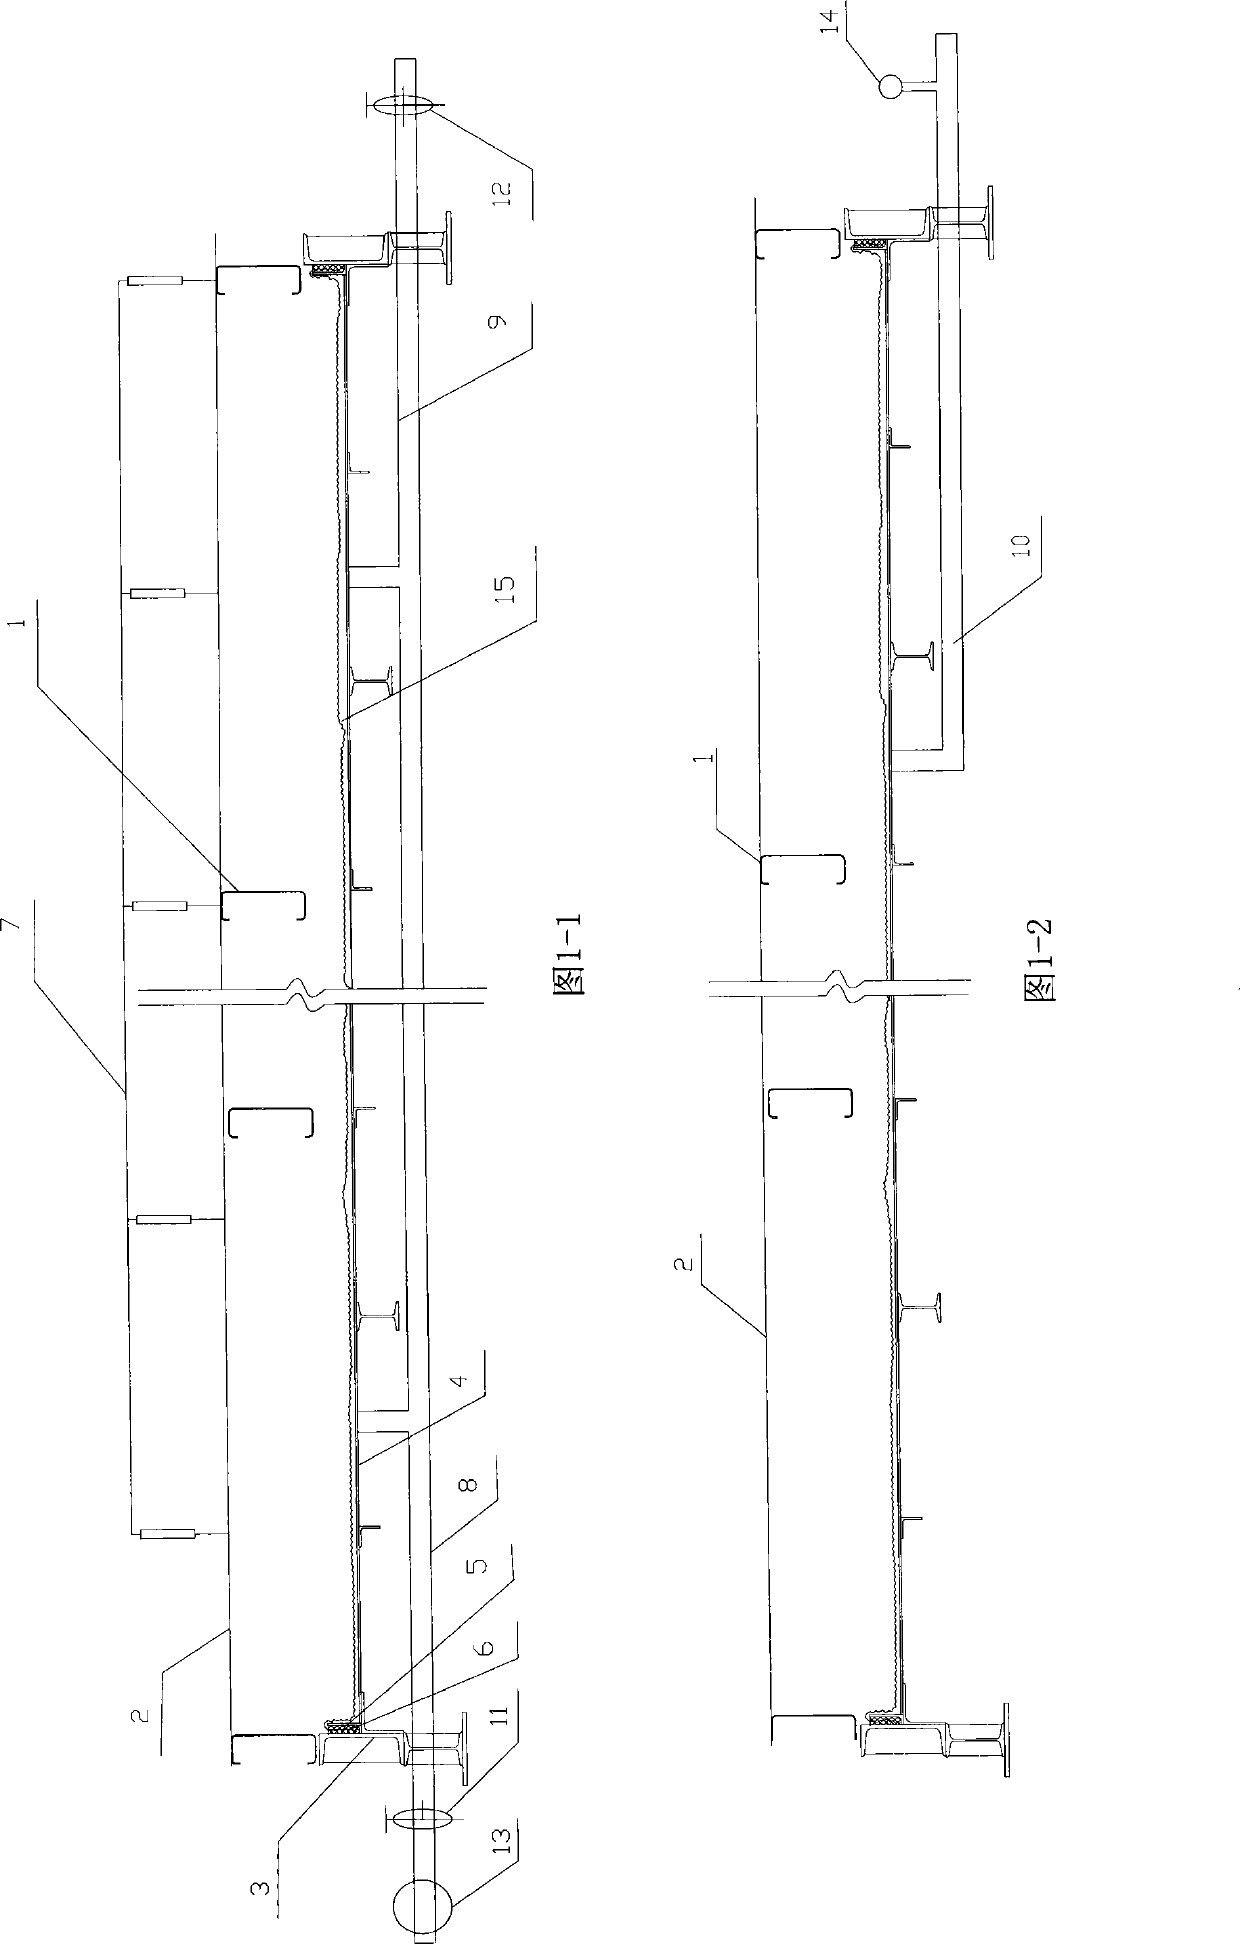 Roof board wind resistance standard test device and test method